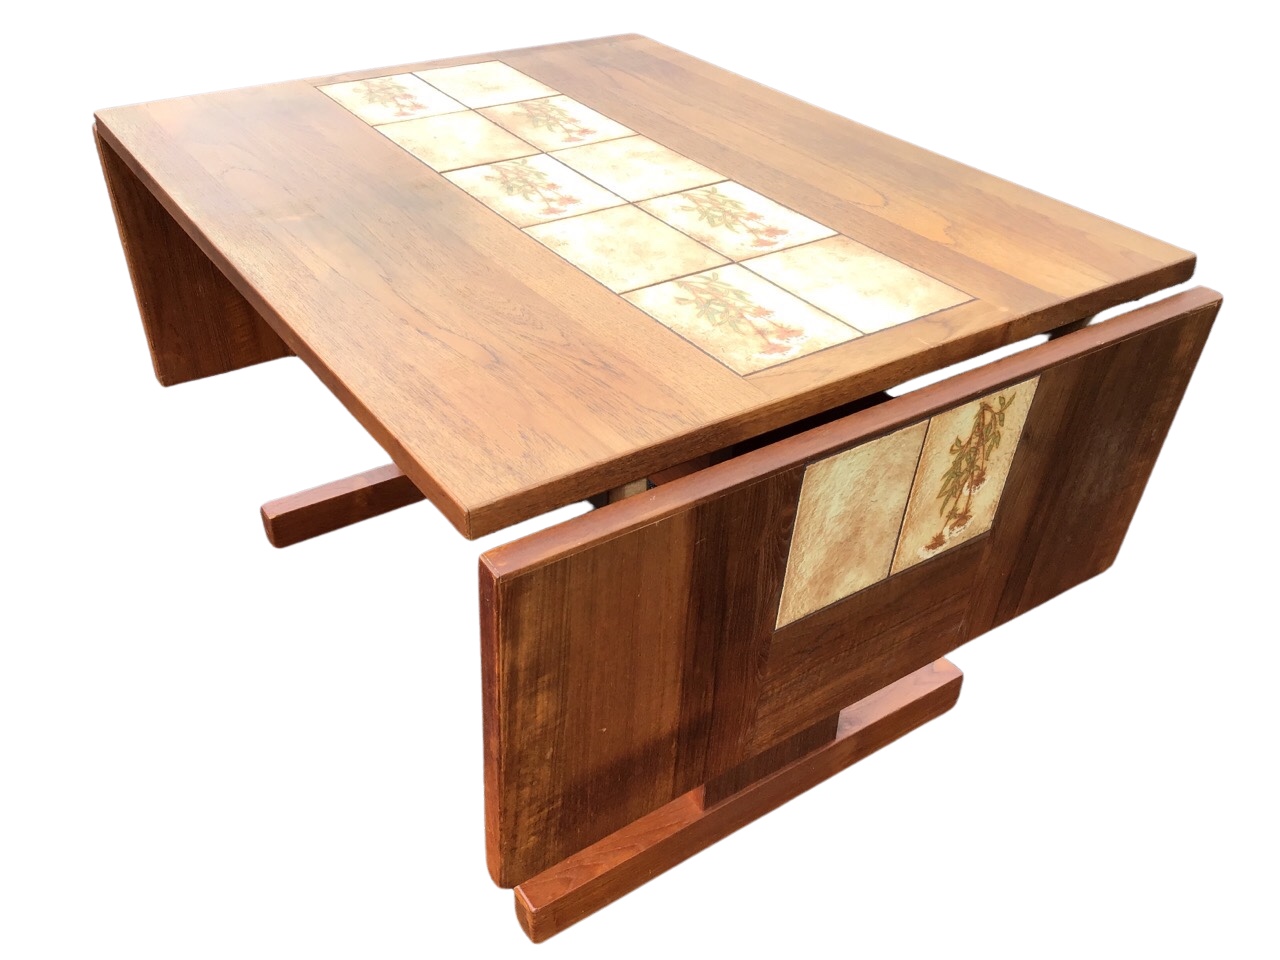 A Danish mid-century teak extending dining table, with two detachable leaves supported on lopers, - Image 2 of 3